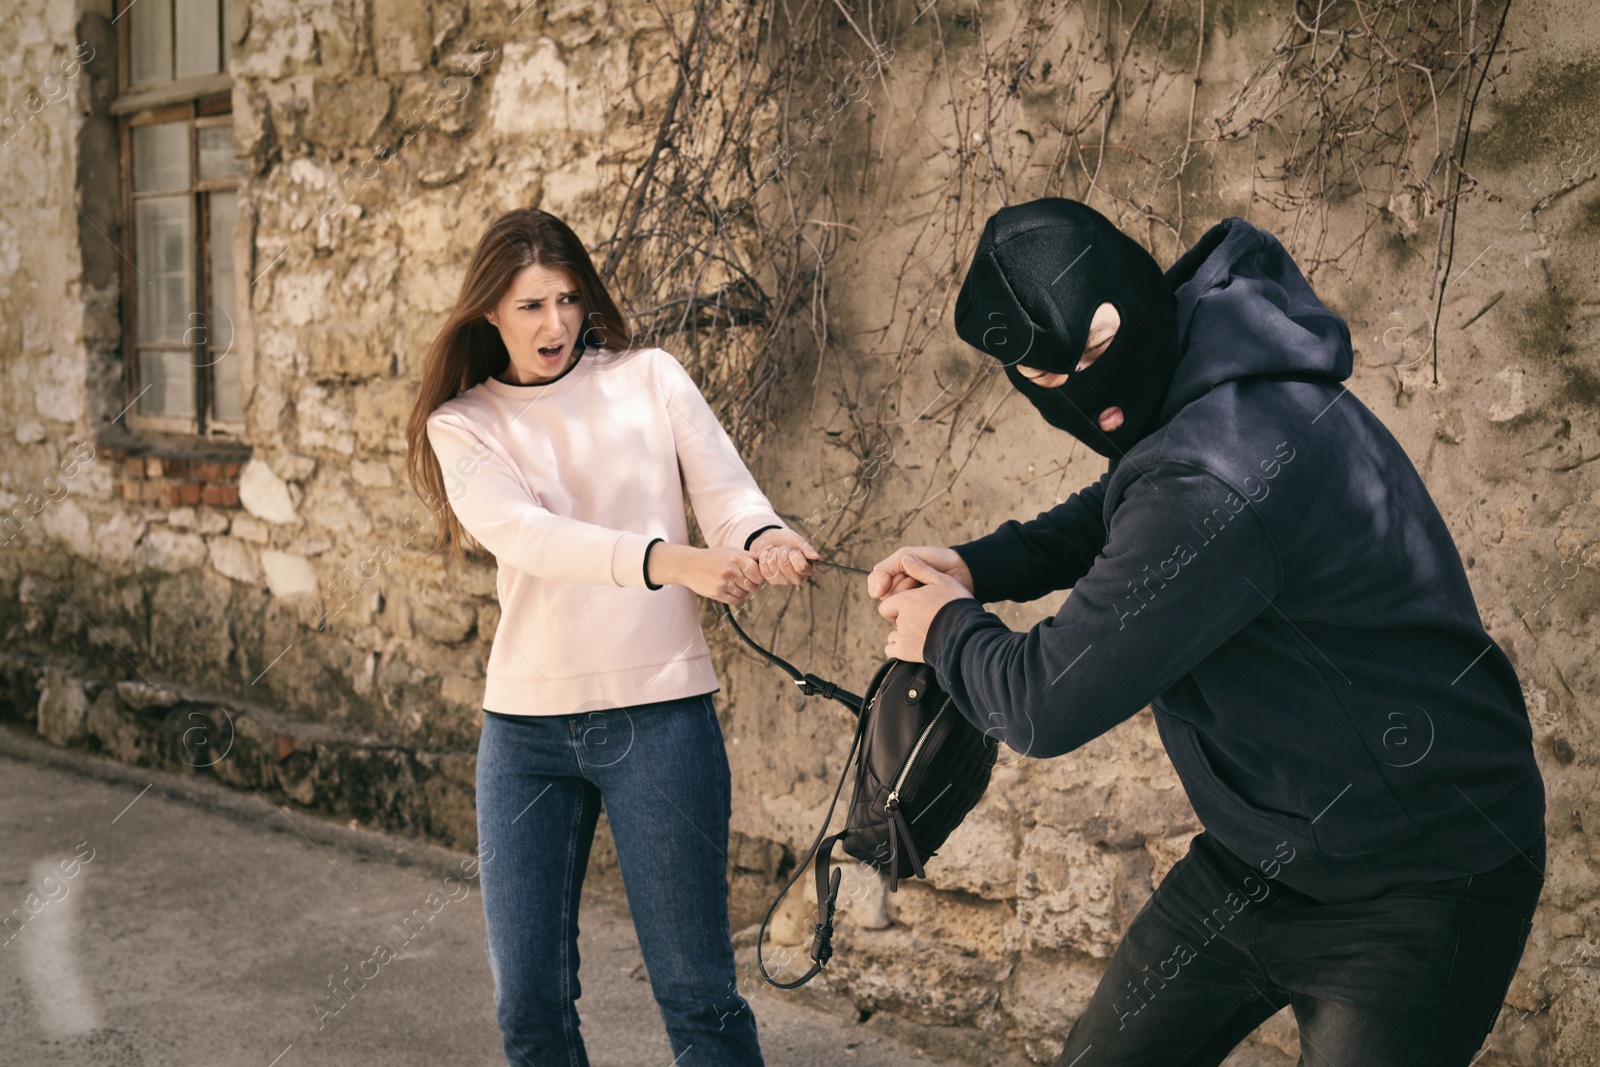 Photo of Masked man trying to steal woman's backpack outdoors. Criminal offence